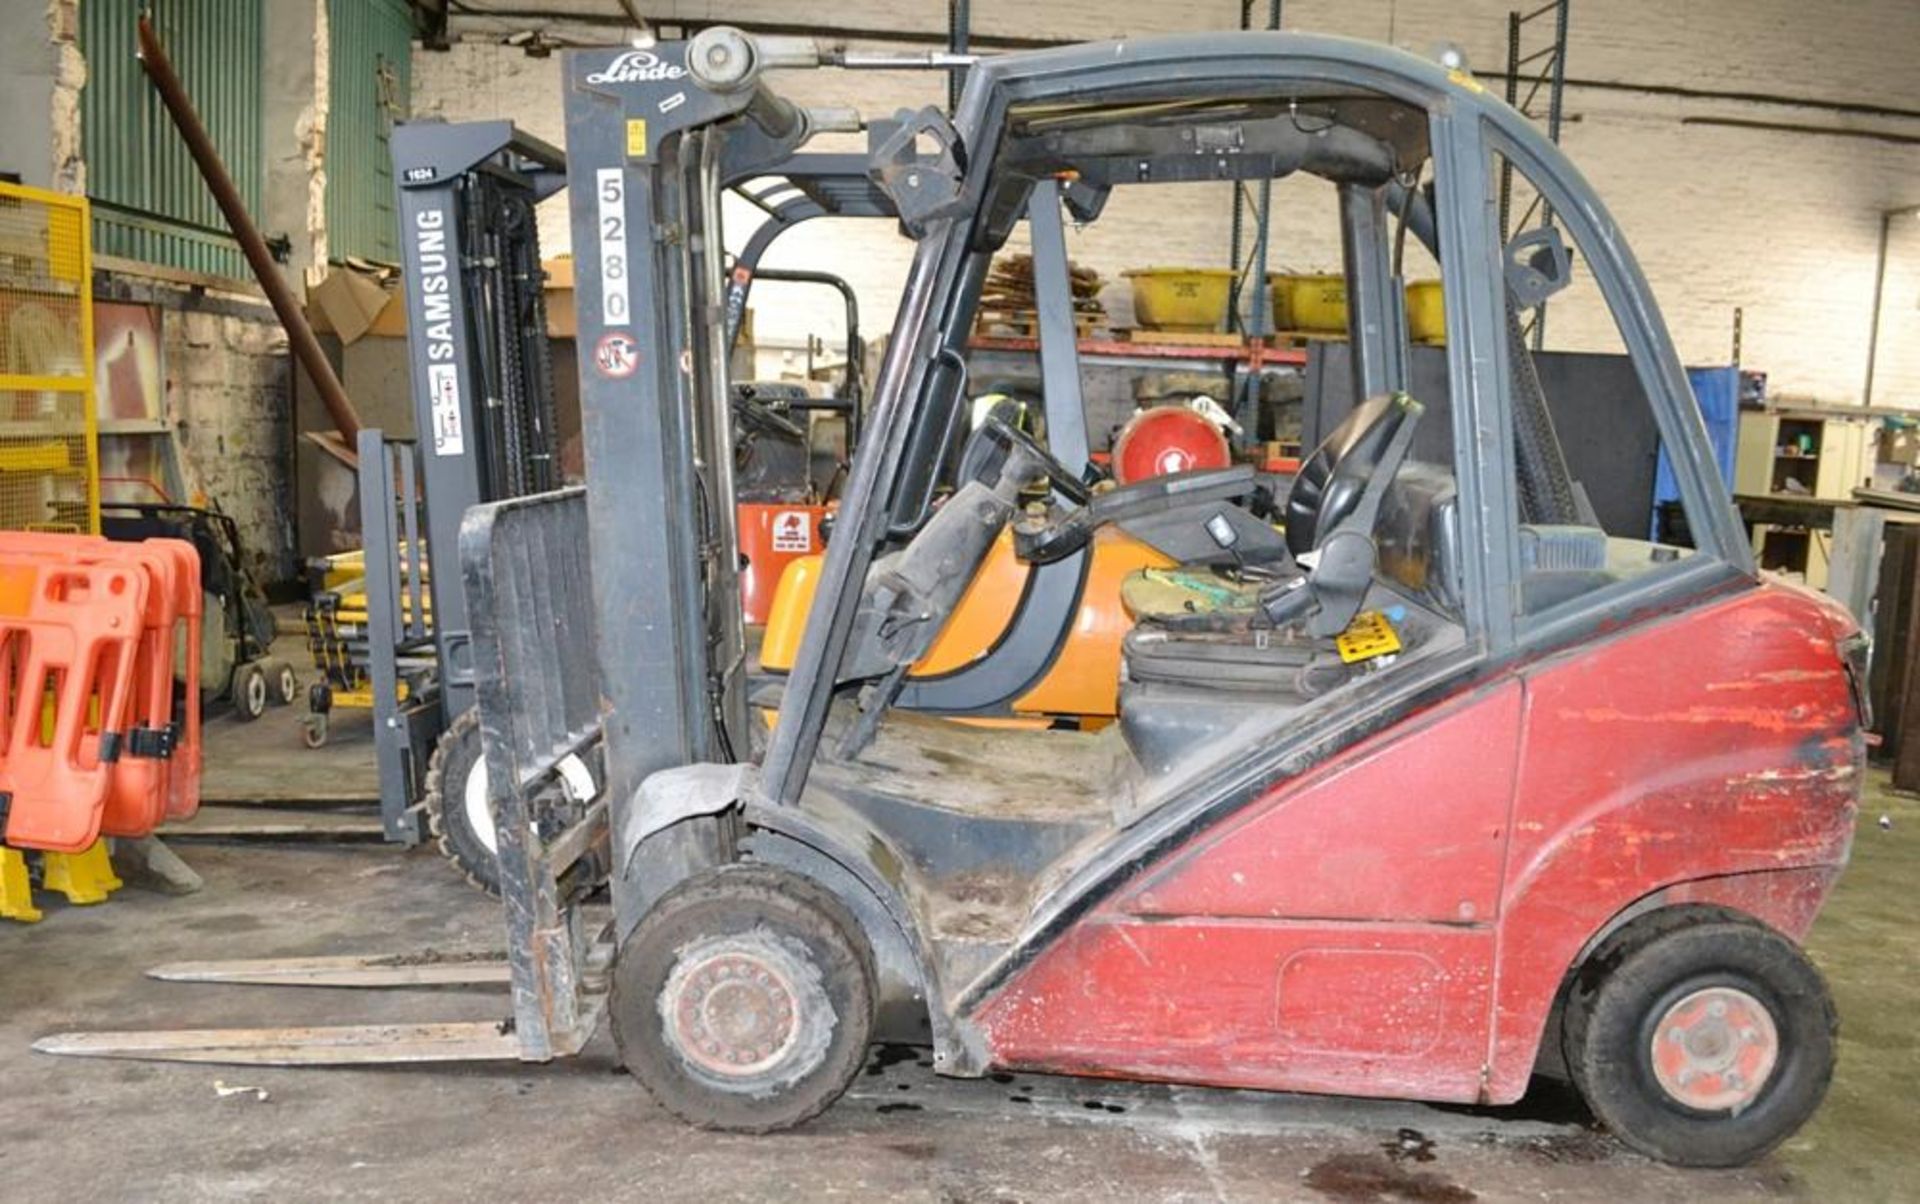 1 x 2003 Lansing Linde H25D Forklift - CL464 - Location: Liverpool L19 - Used In Working Condition